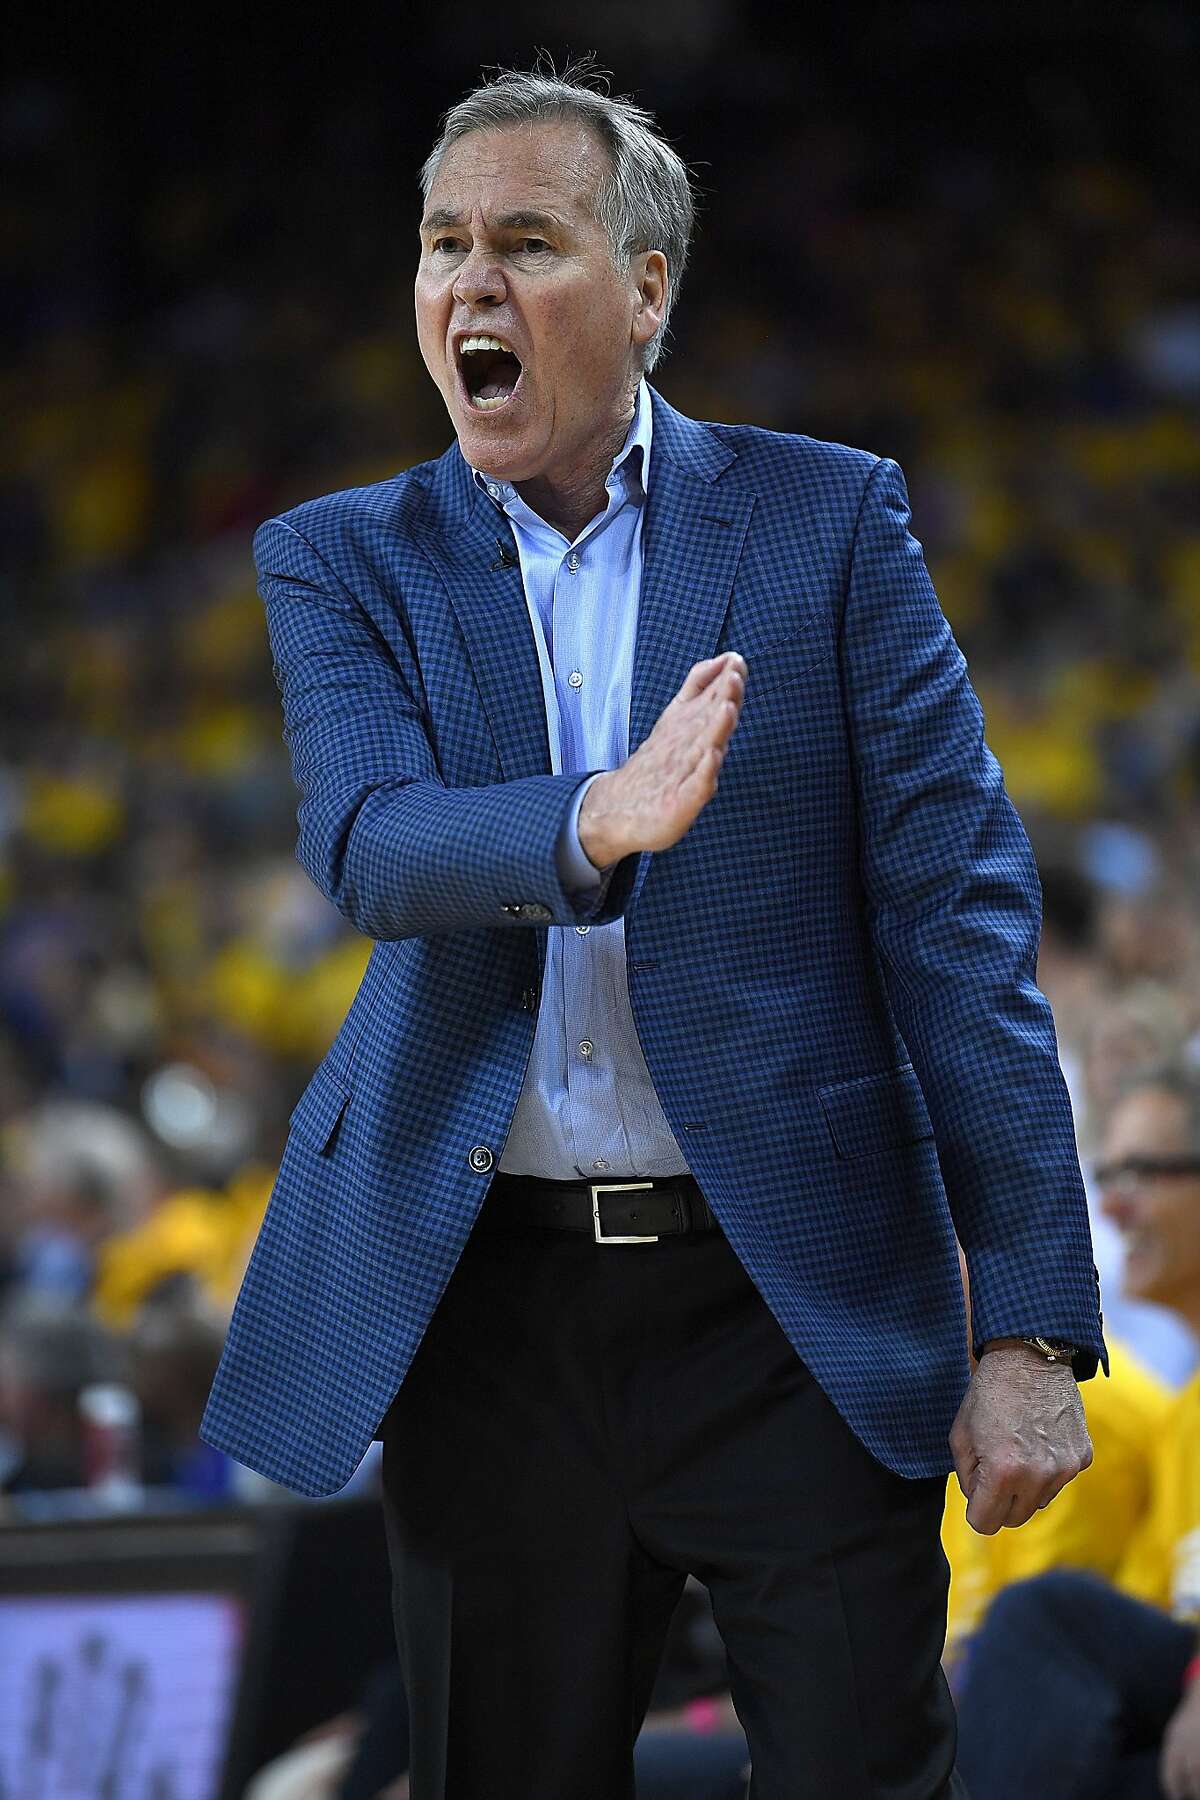 OAKLAND, CA - APRIL 28: Head coach Mike D'Antoni of the Houston Rockets reacts after he was called for a techical foul against the Golden State Warriors during Game One of the Second Round of the 2019 NBA Western Conference Playoffs at ORACLE Arena on April 28, 2019 in Oakland, California. NOTE TO USER: User expressly acknowledges and agrees that, by downloading and or using this photograph, User is consenting to the terms and conditions of the Getty Images License Agreement. (Photo by Thearon W. Henderson/Getty Images)